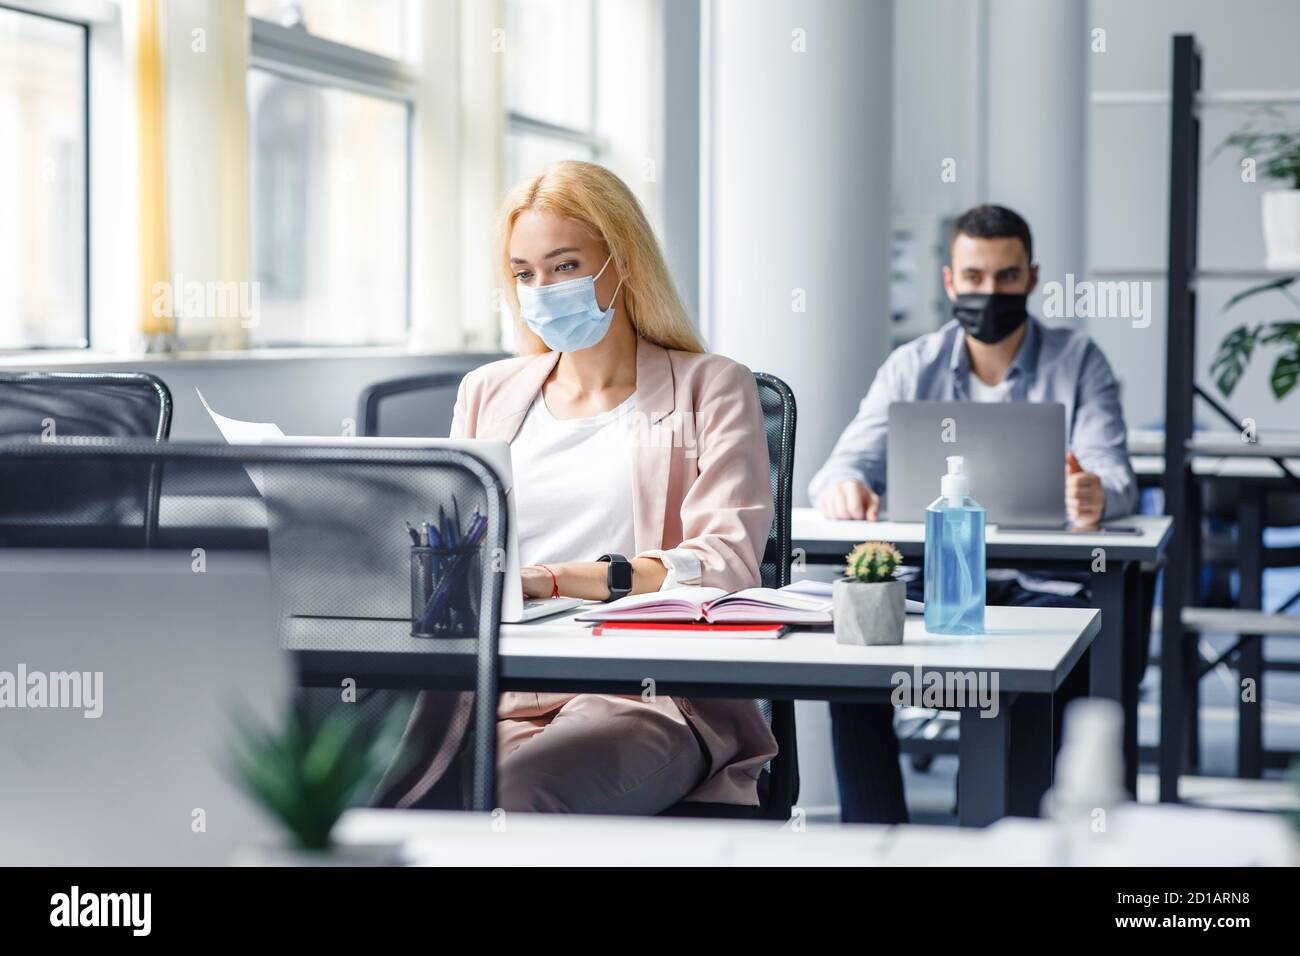 New working conditions and social distancing after covid-19 quarantine. Blonde woman in protective mask works with documents and laptop Stock Photo